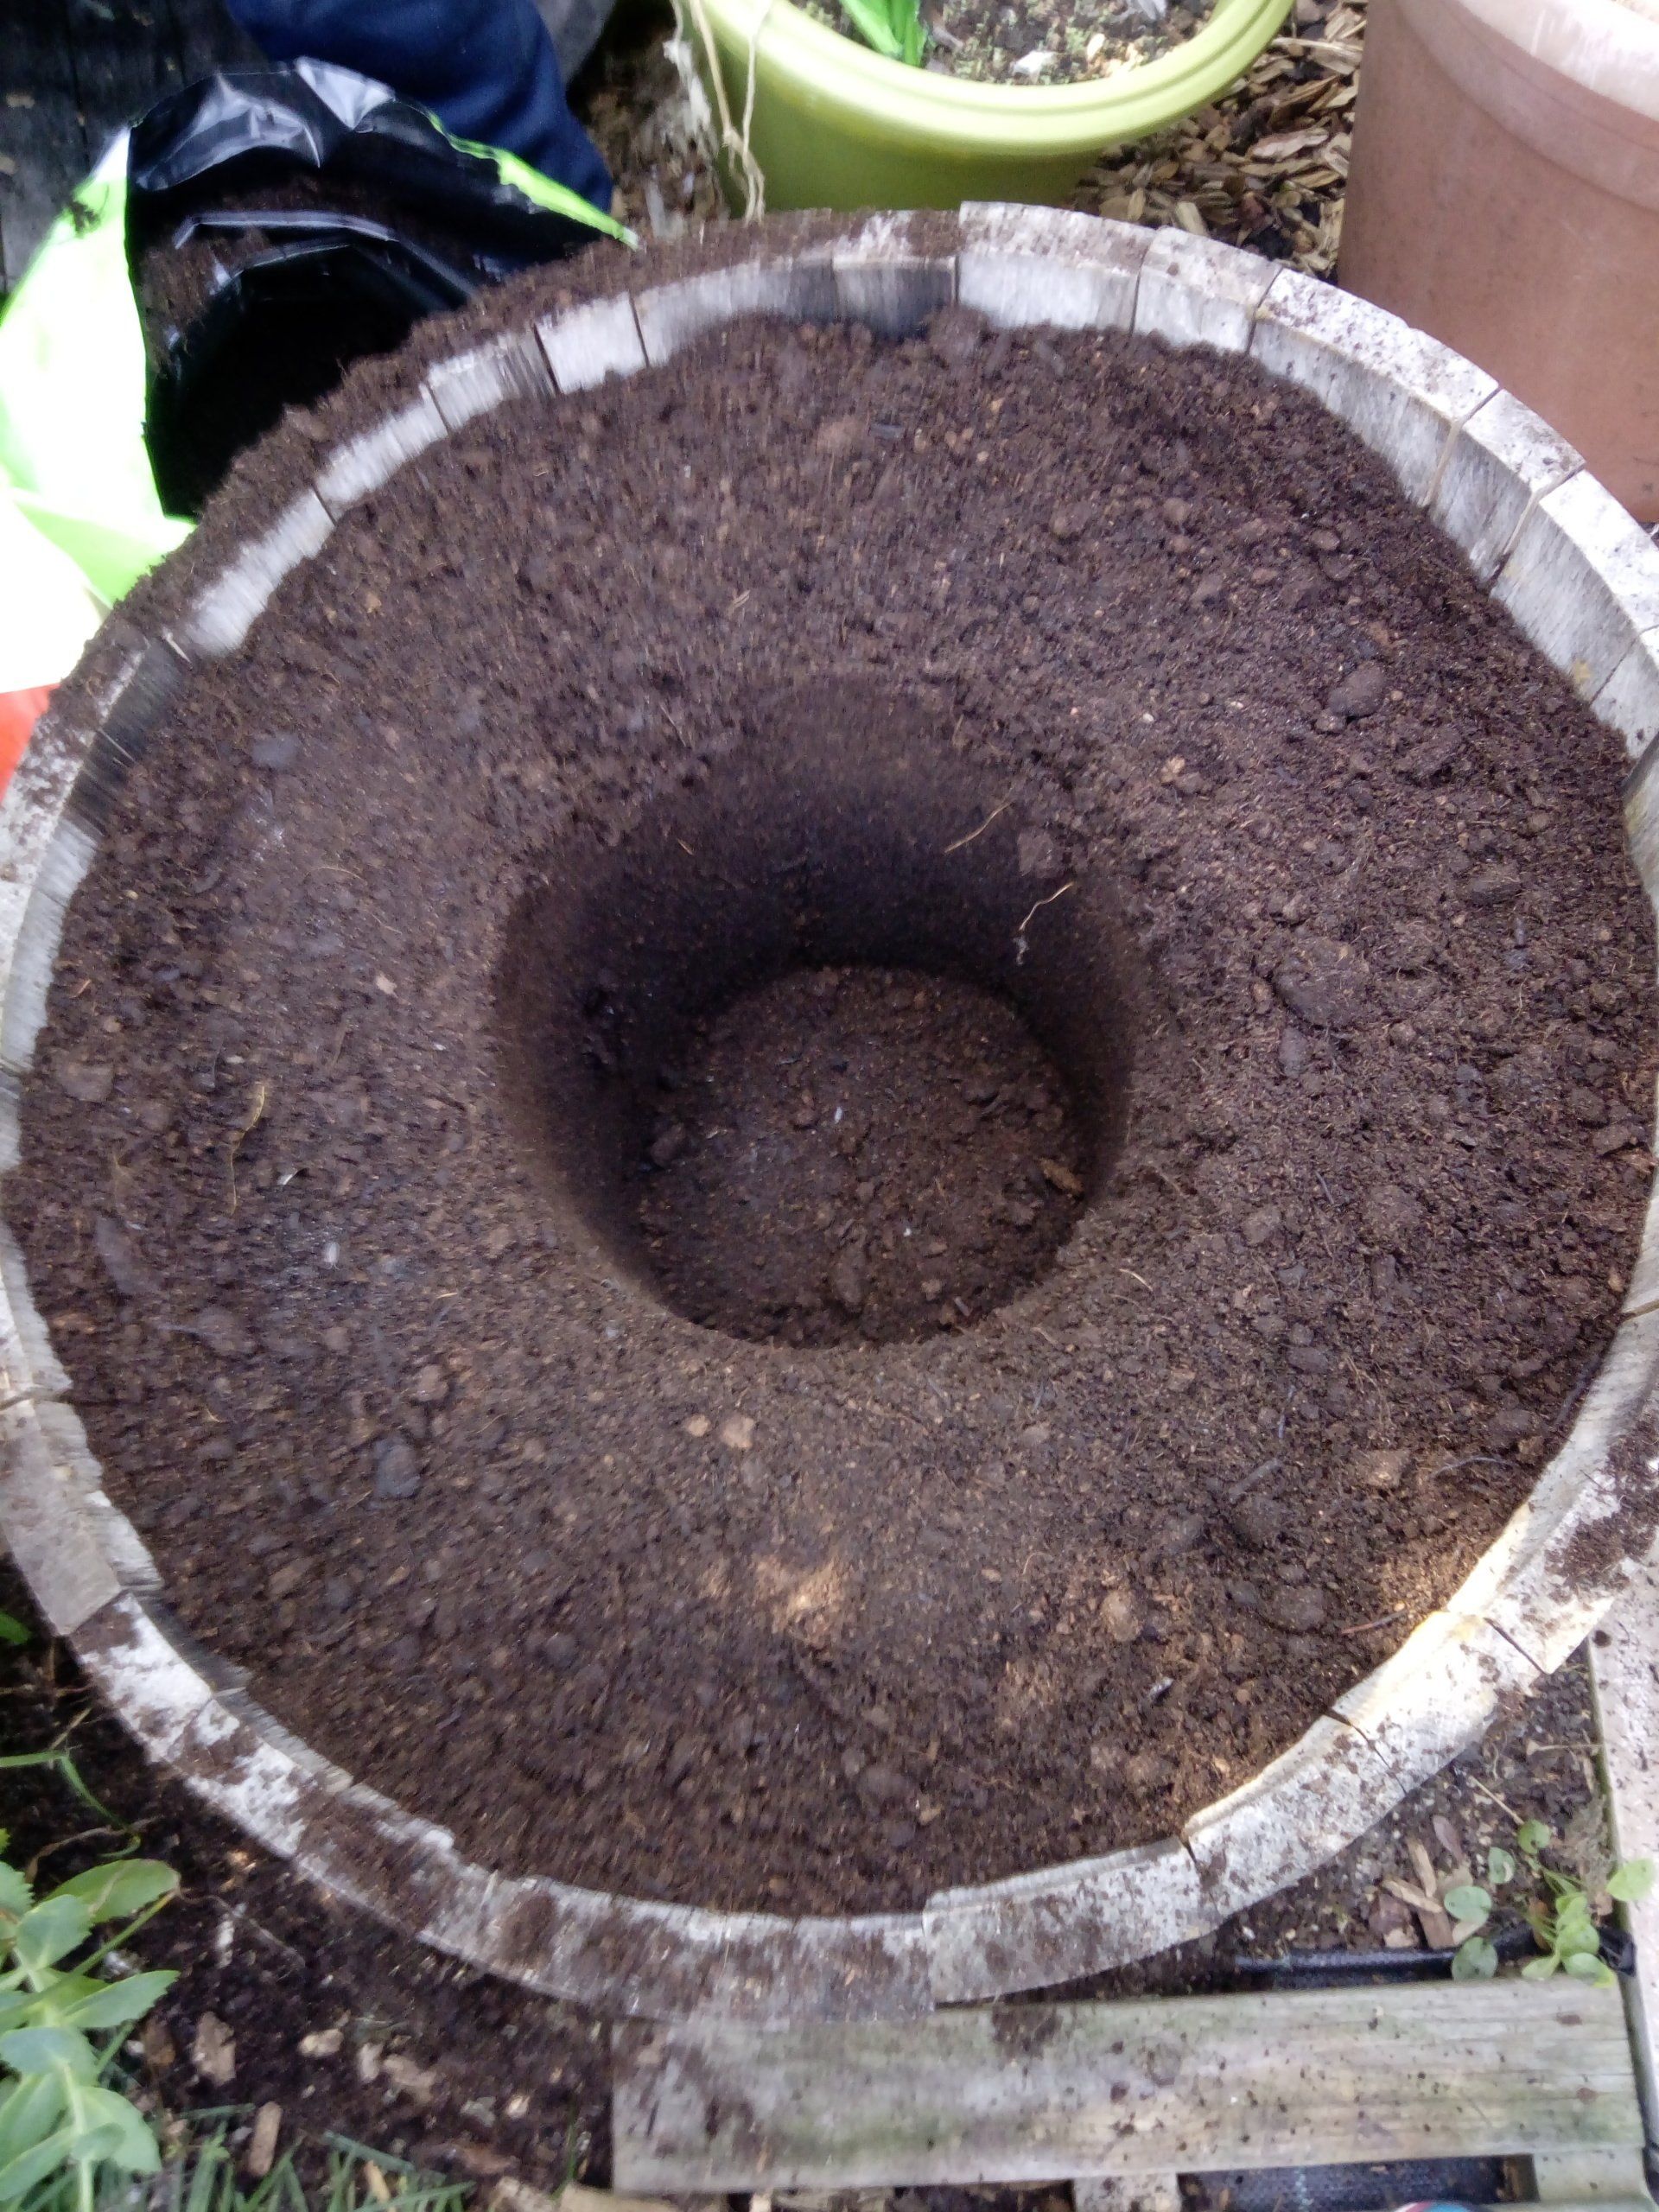 Wooden Barrel with compost ready for planting